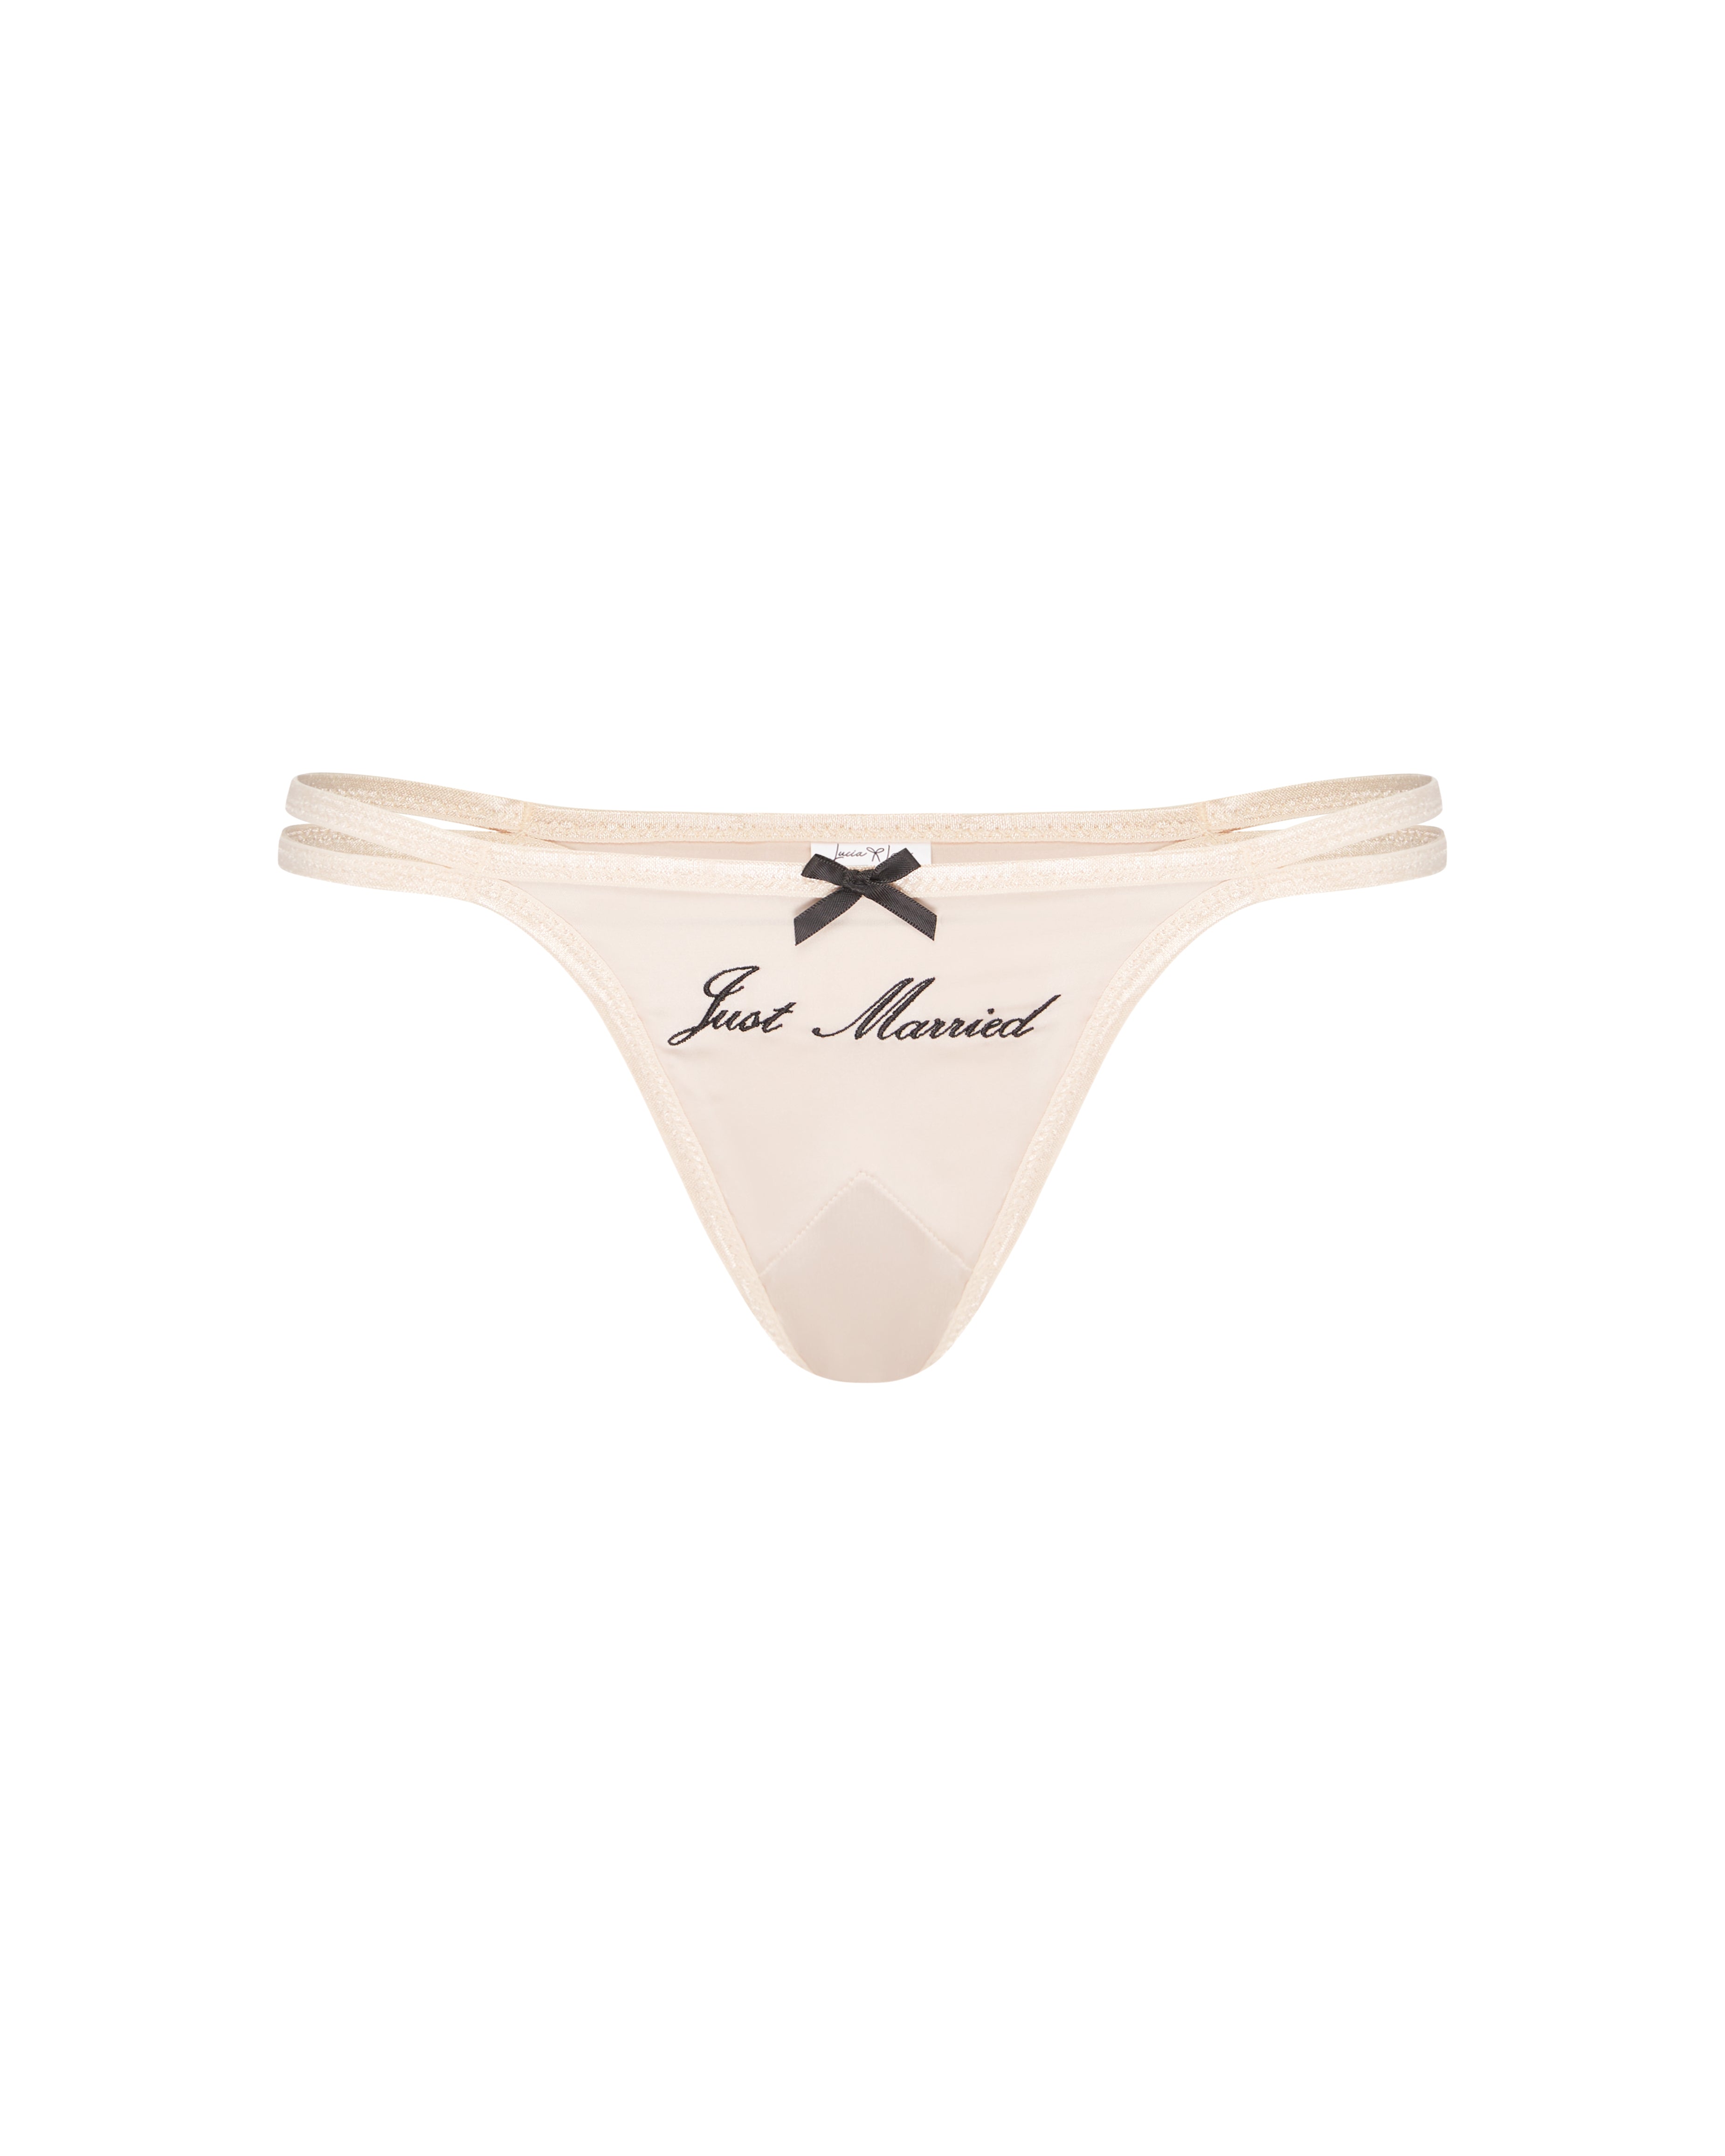 The Just Married Panty